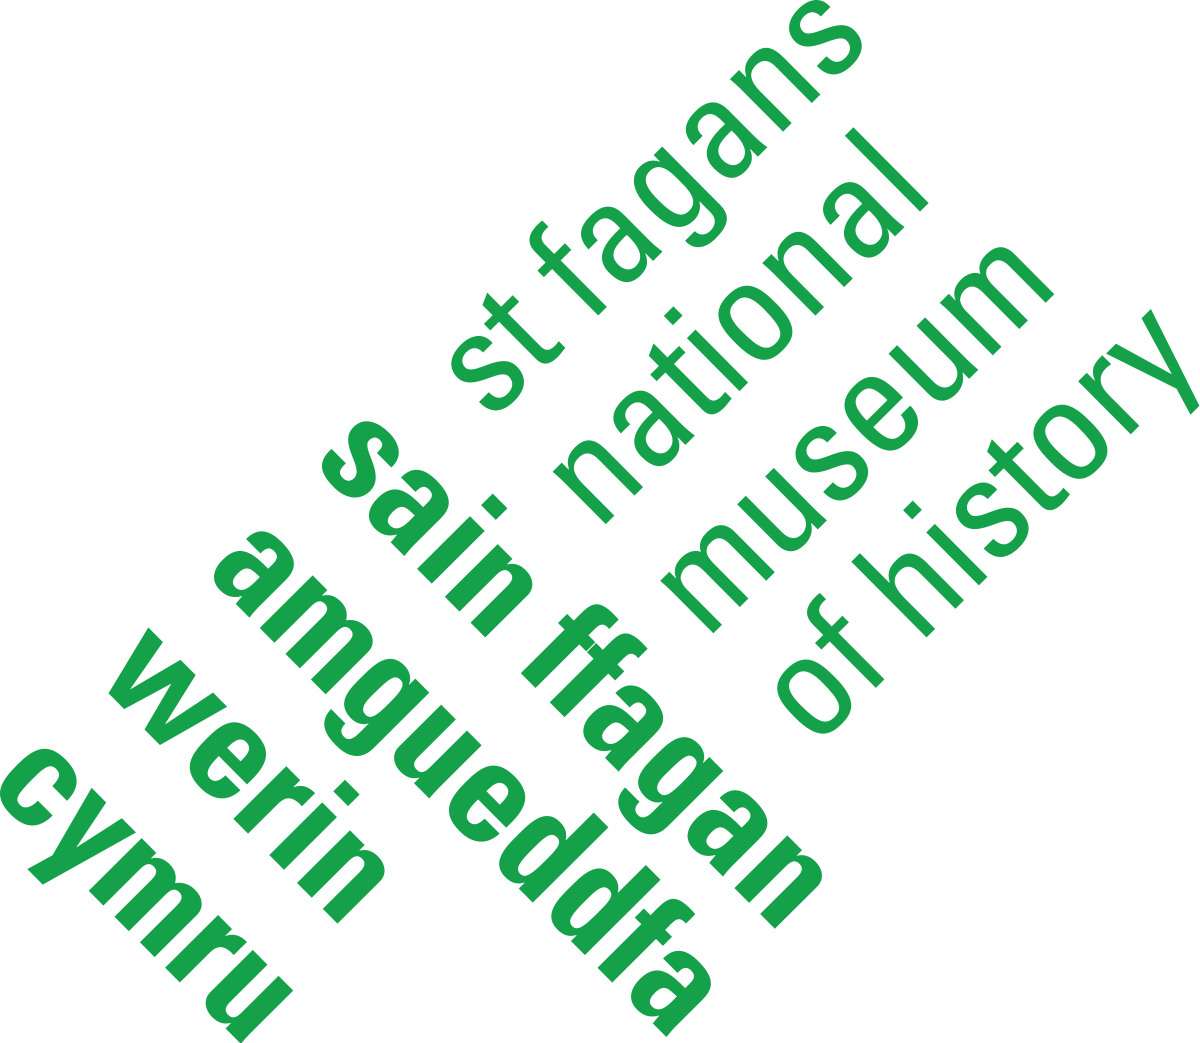 St Fagans National Museum of History - Wikipedia